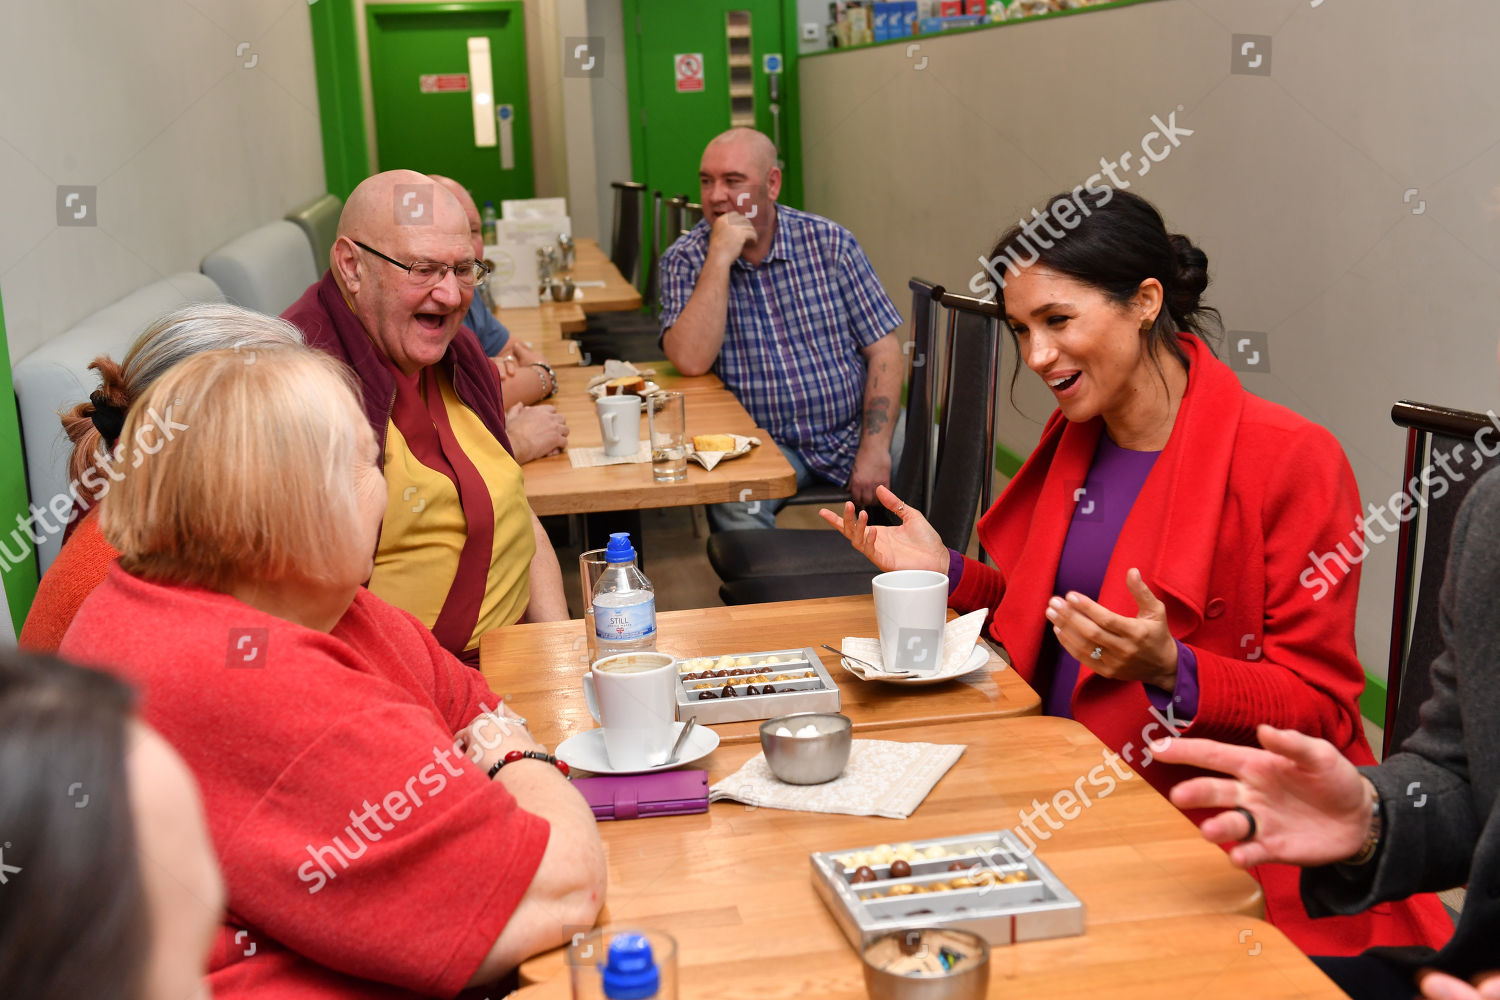 prince-harry-and-meghan-duchess-of-sussex-visit-to-birkenhead-uk-shutterstock-editorial-10056256o.jpg